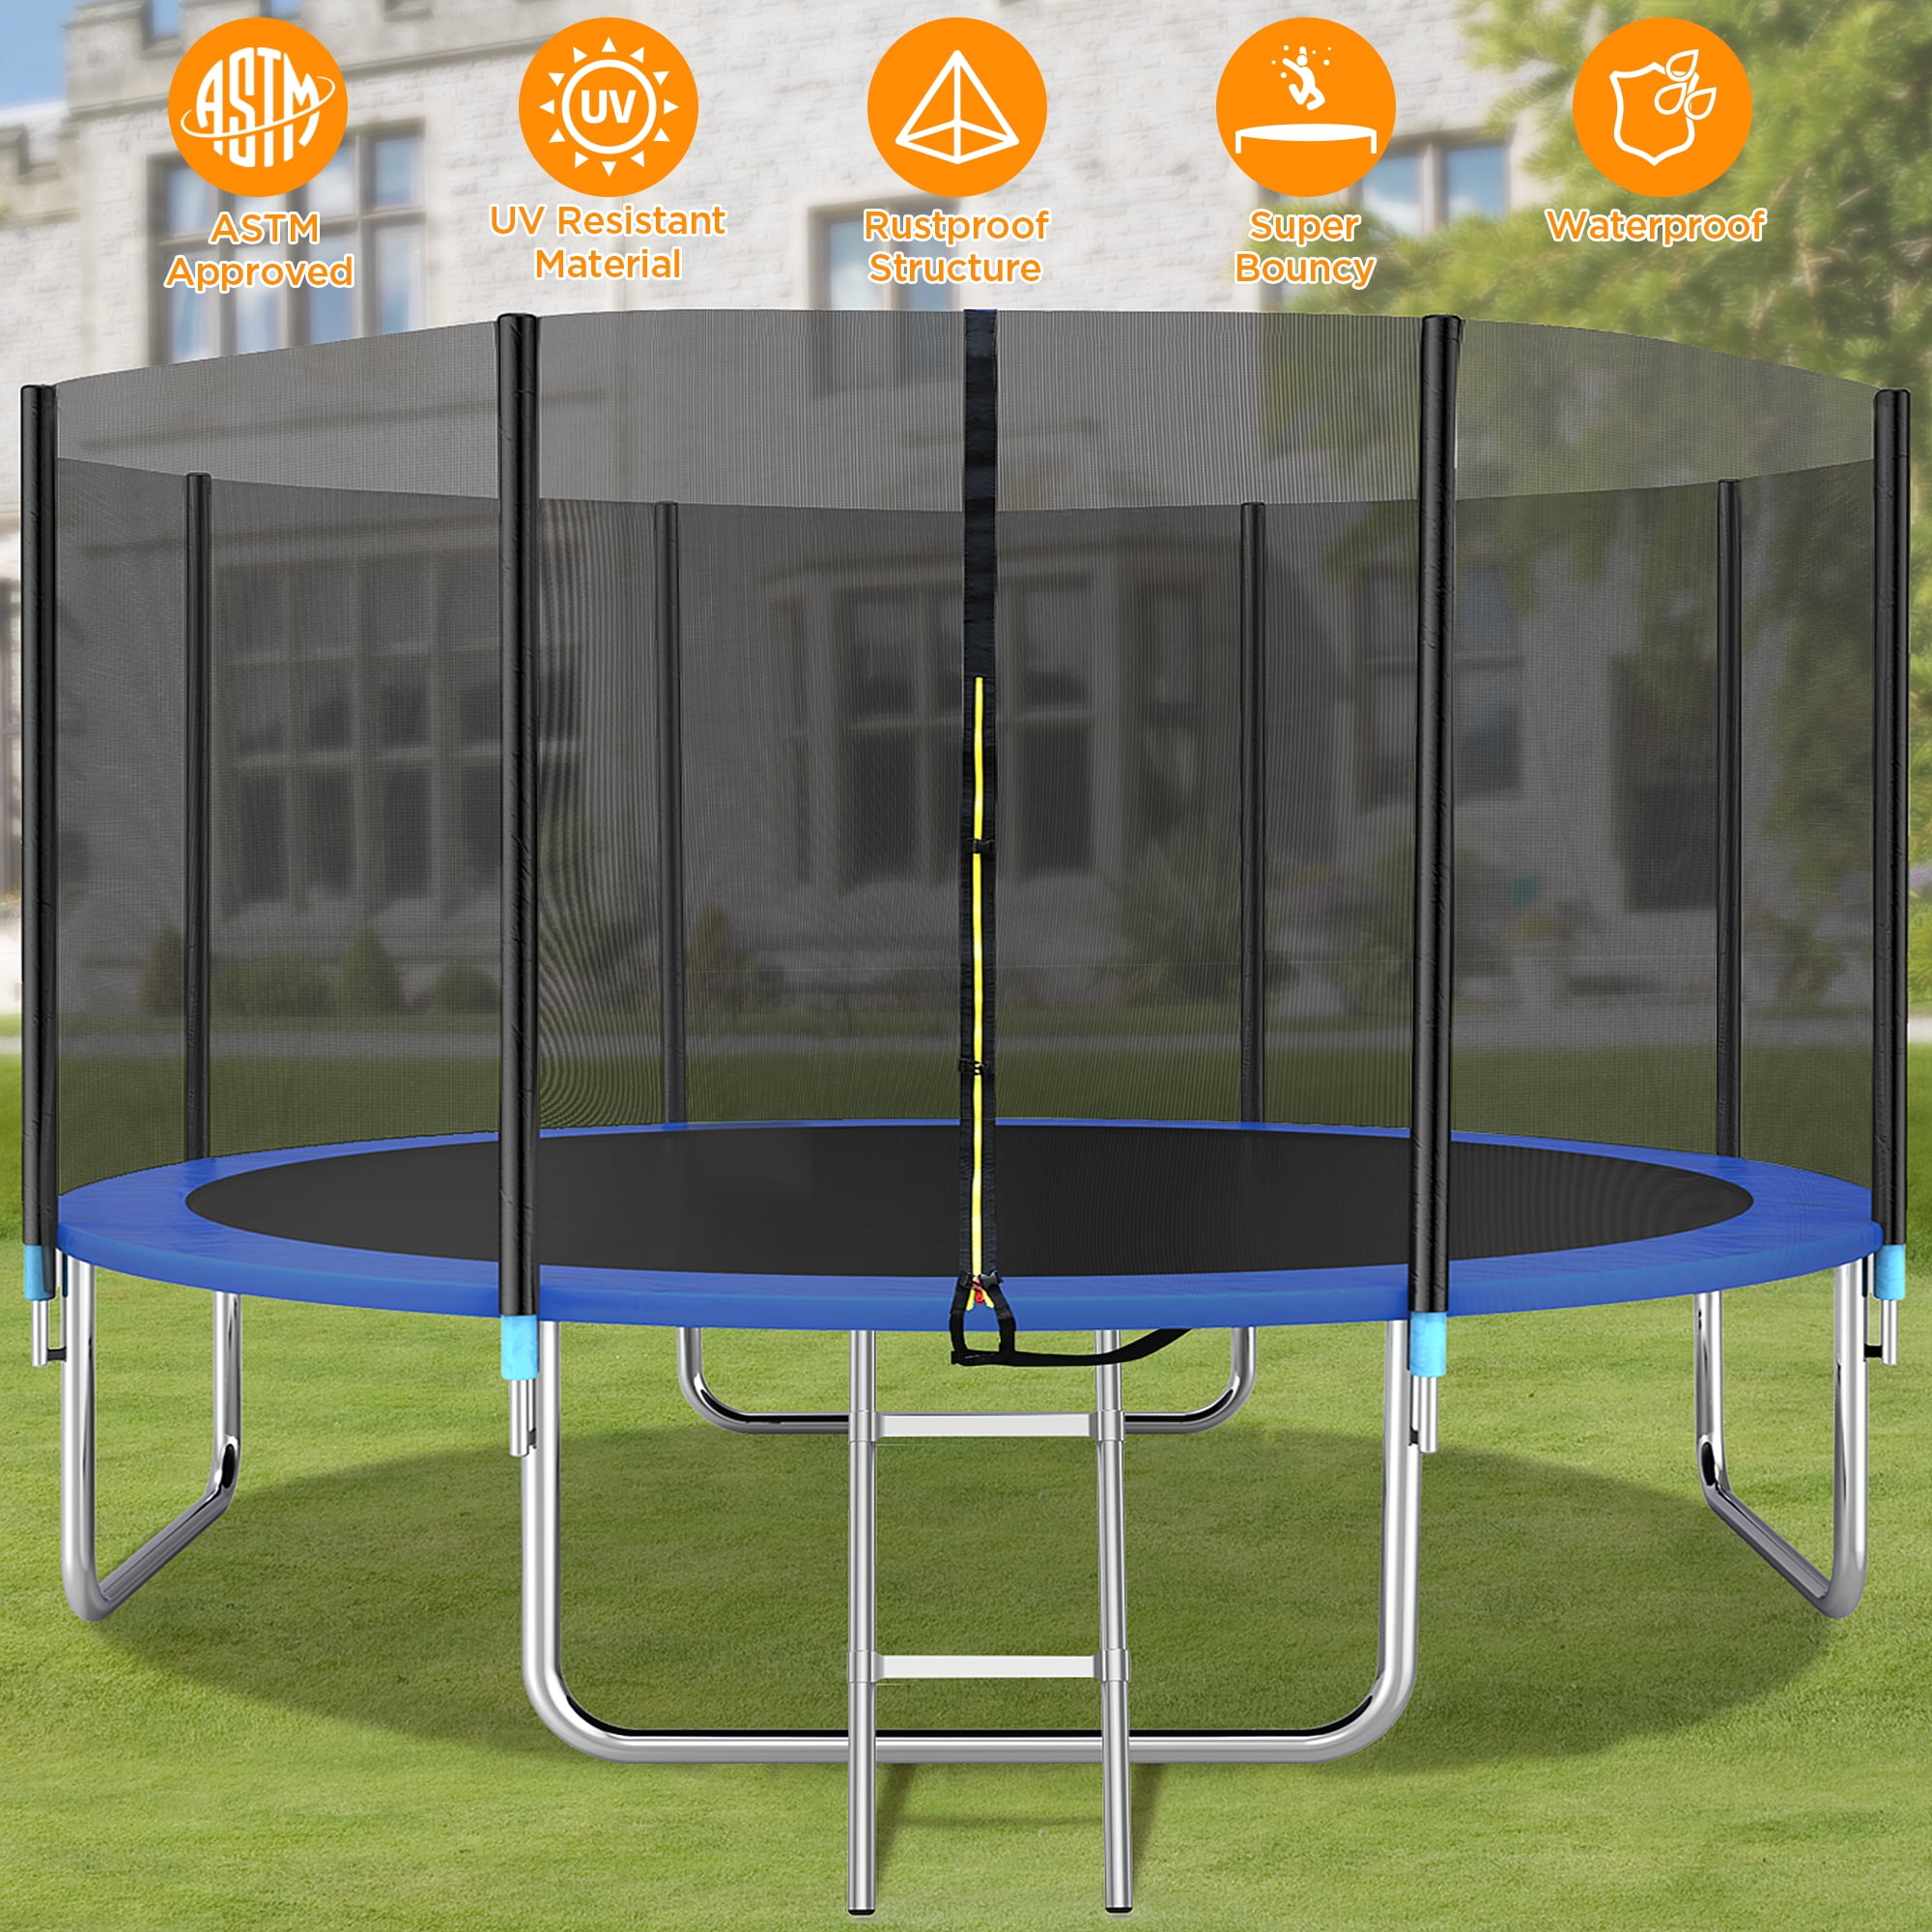 Spring Pad and Ladder 330LBS Load 14FT Trampoline with Safety Enclosure Net 